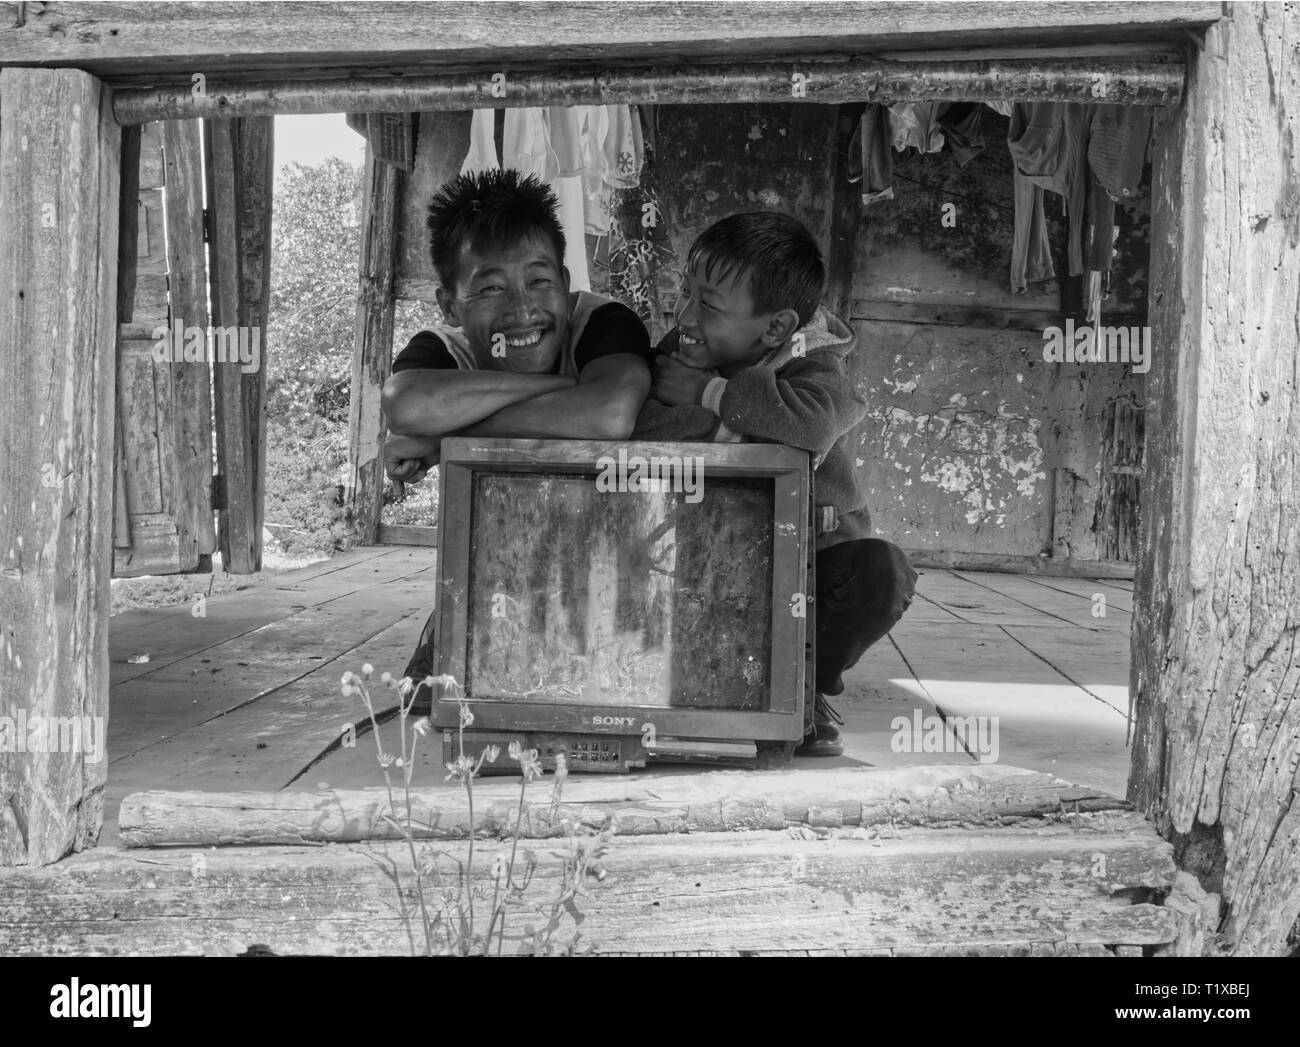 Brothers Laughing After Finding Old TV In An Abandoned House Stock Photo